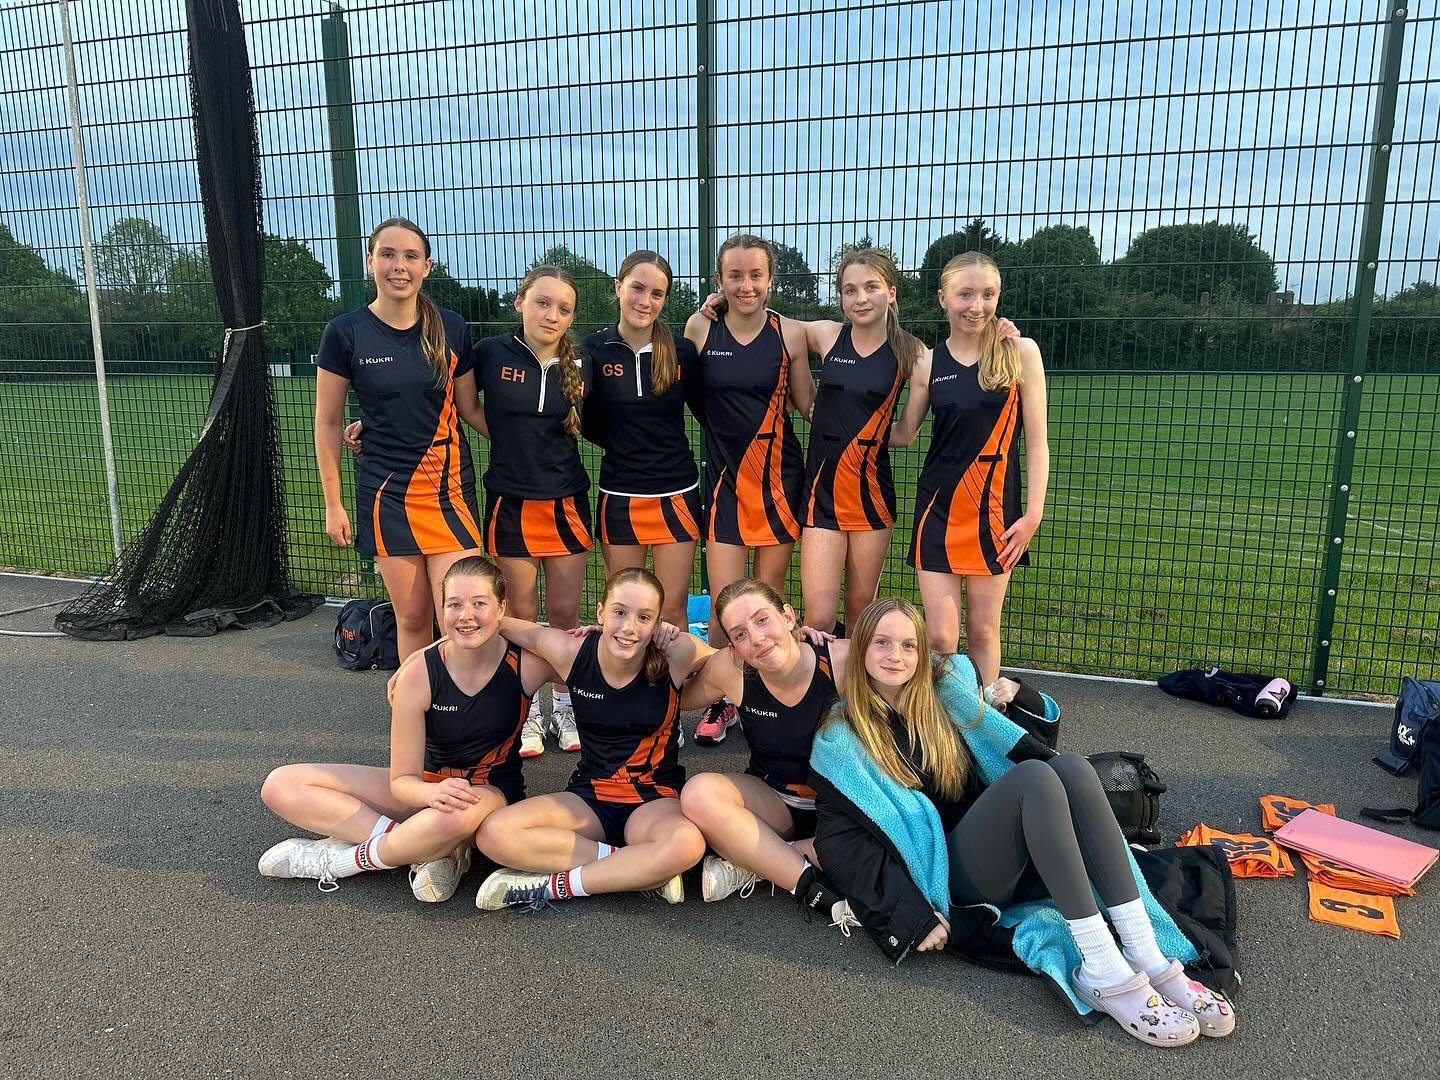 U13 Oranges v Hornets U14s Navy team&hellip;. A lovely game to watch this evening. The players really worked hard from the start, great changes of direction, feeds into the D, and defensive work well done to everyone. Thanks to Freya for coming along